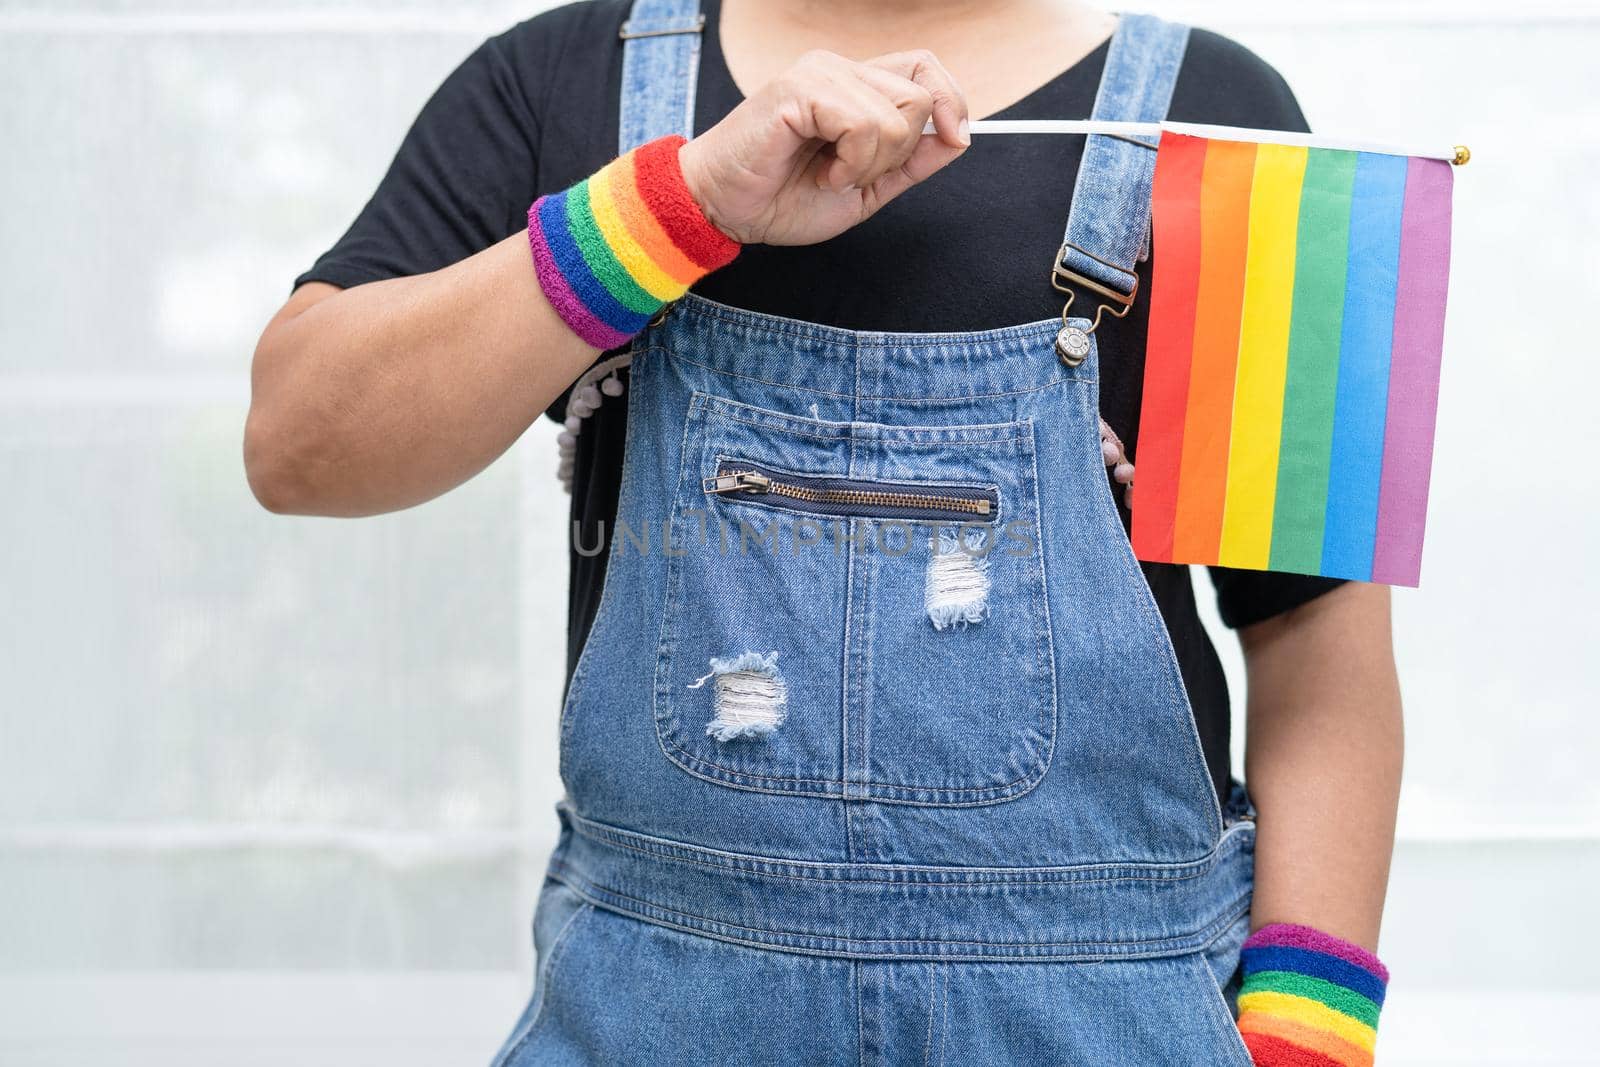 Asian lady wearing blue jean jacket or denim shirt and holding rainbow color flag, symbol of LGBT pride month celebrate annual in June social of gay, lesbian, bisexual, transgender, human rights. by pamai